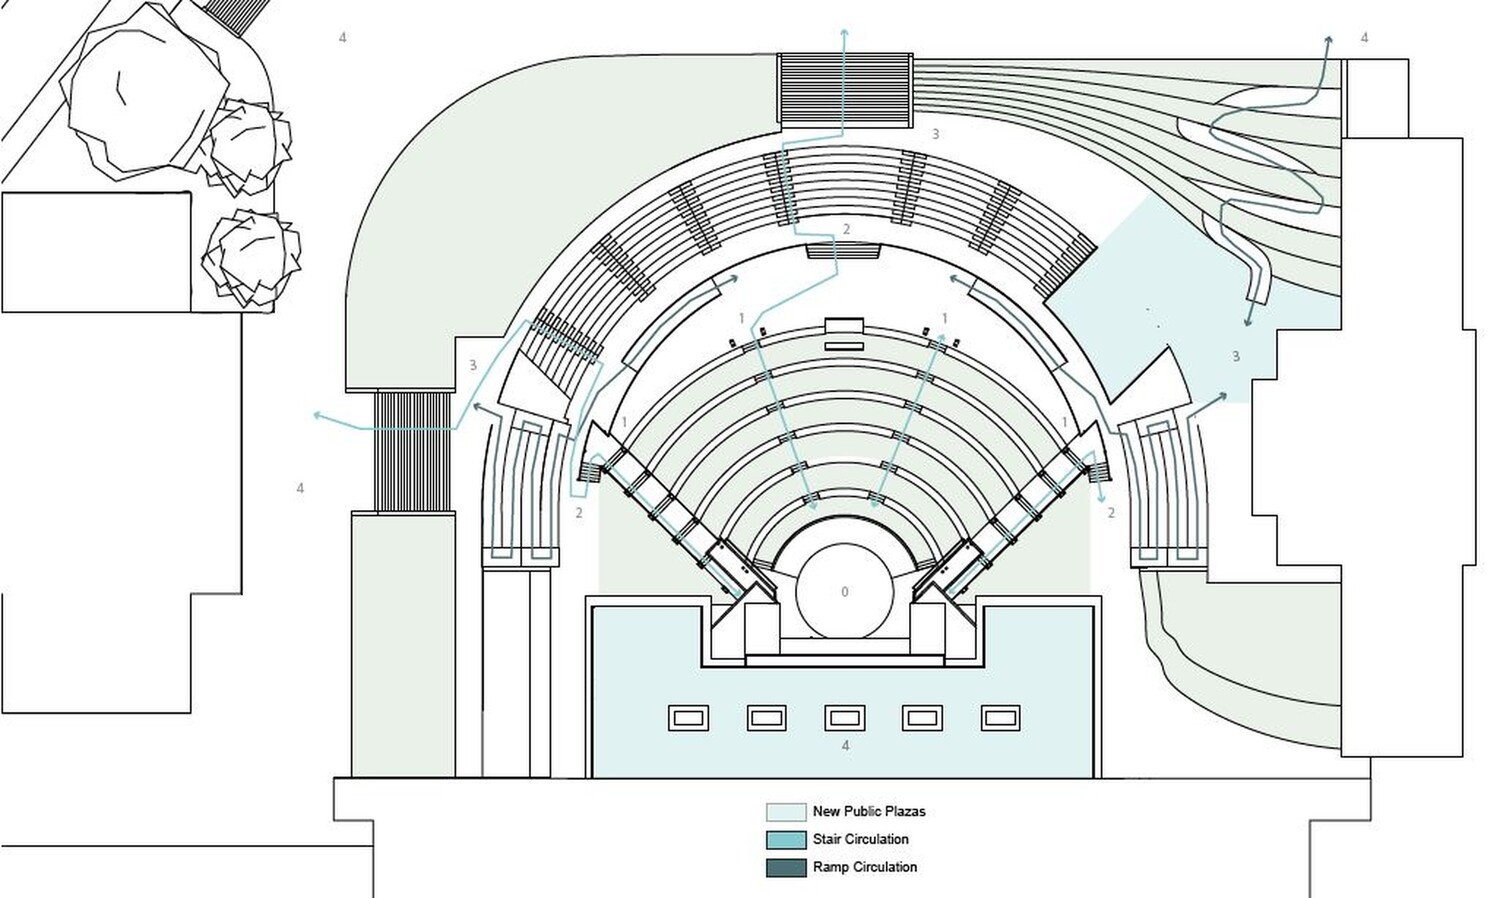 Proposed Circulation and Public Space: Clear and accessible circulation paths are essential is allowing visitors to move easily throughout the site. In the proposed design, various stairs and ramps allow visitors to move betweenfour distinct levels (marked above by numbers). The widening of existing stairs and addition of railings allow the staircases to become more accessible, while ramps on either side of the stageallow for even more accessibility options